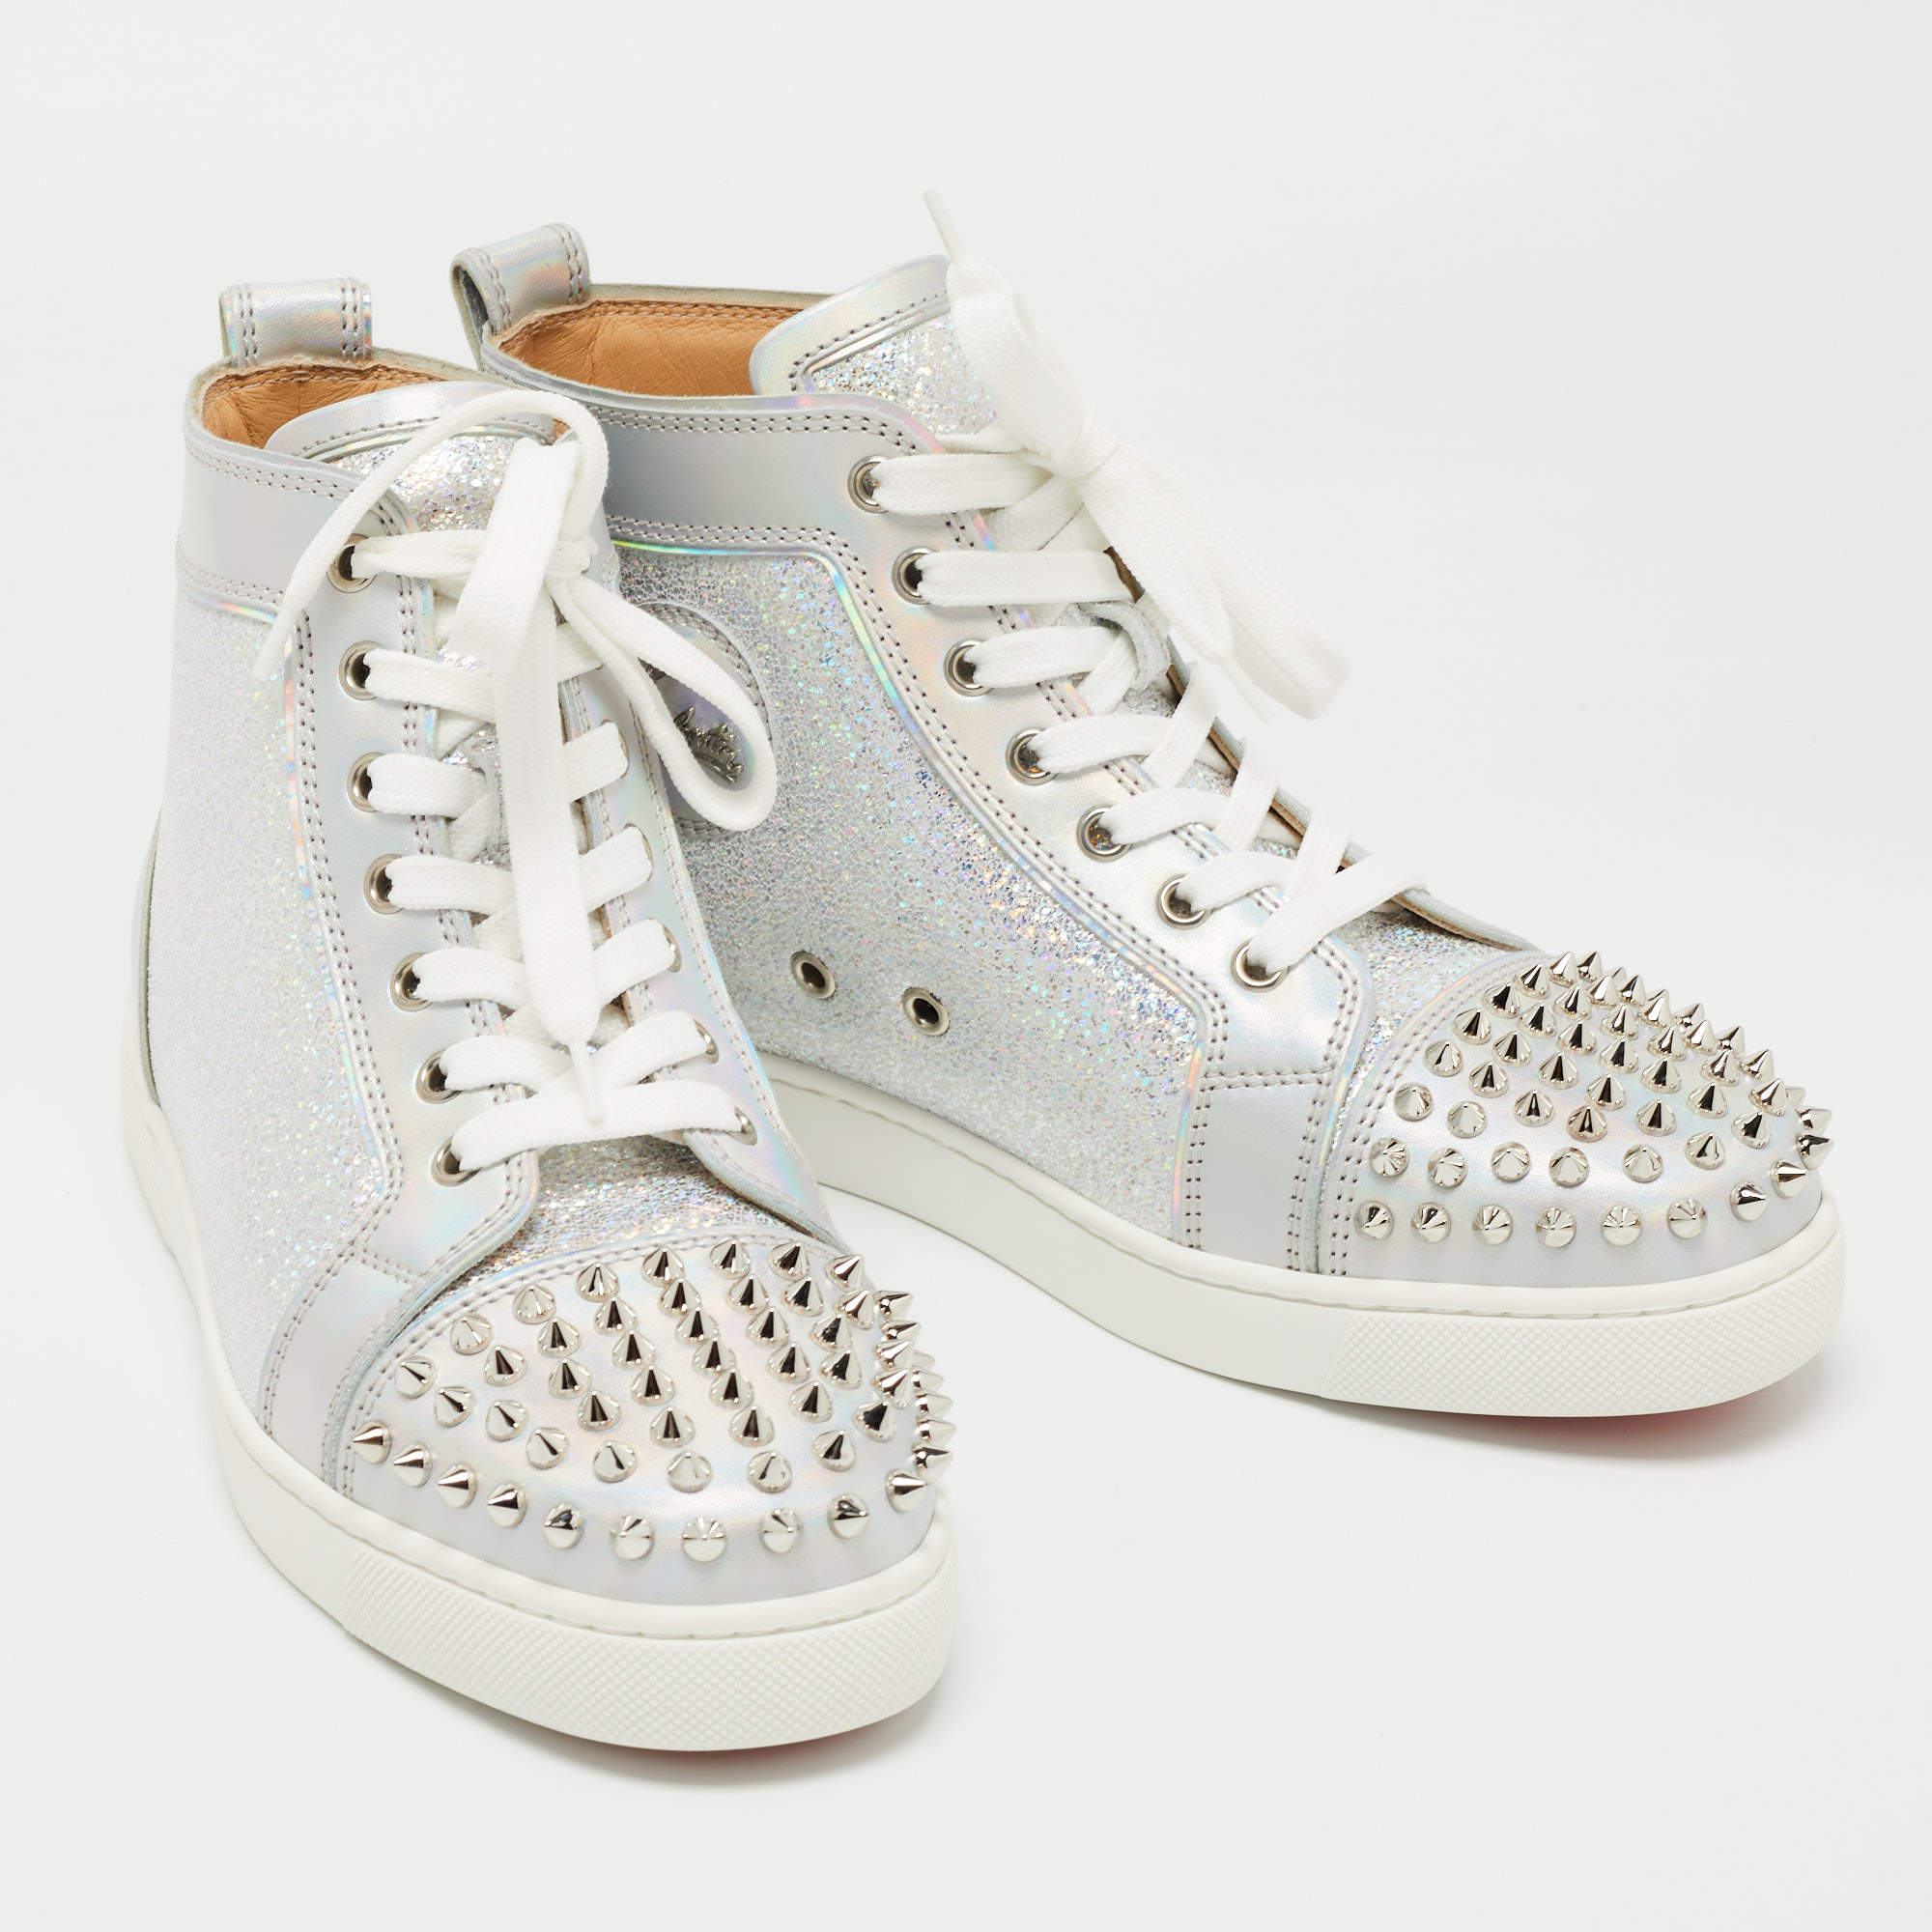 Christian Louboutin Spikes Flat Sue Sneakers size 39